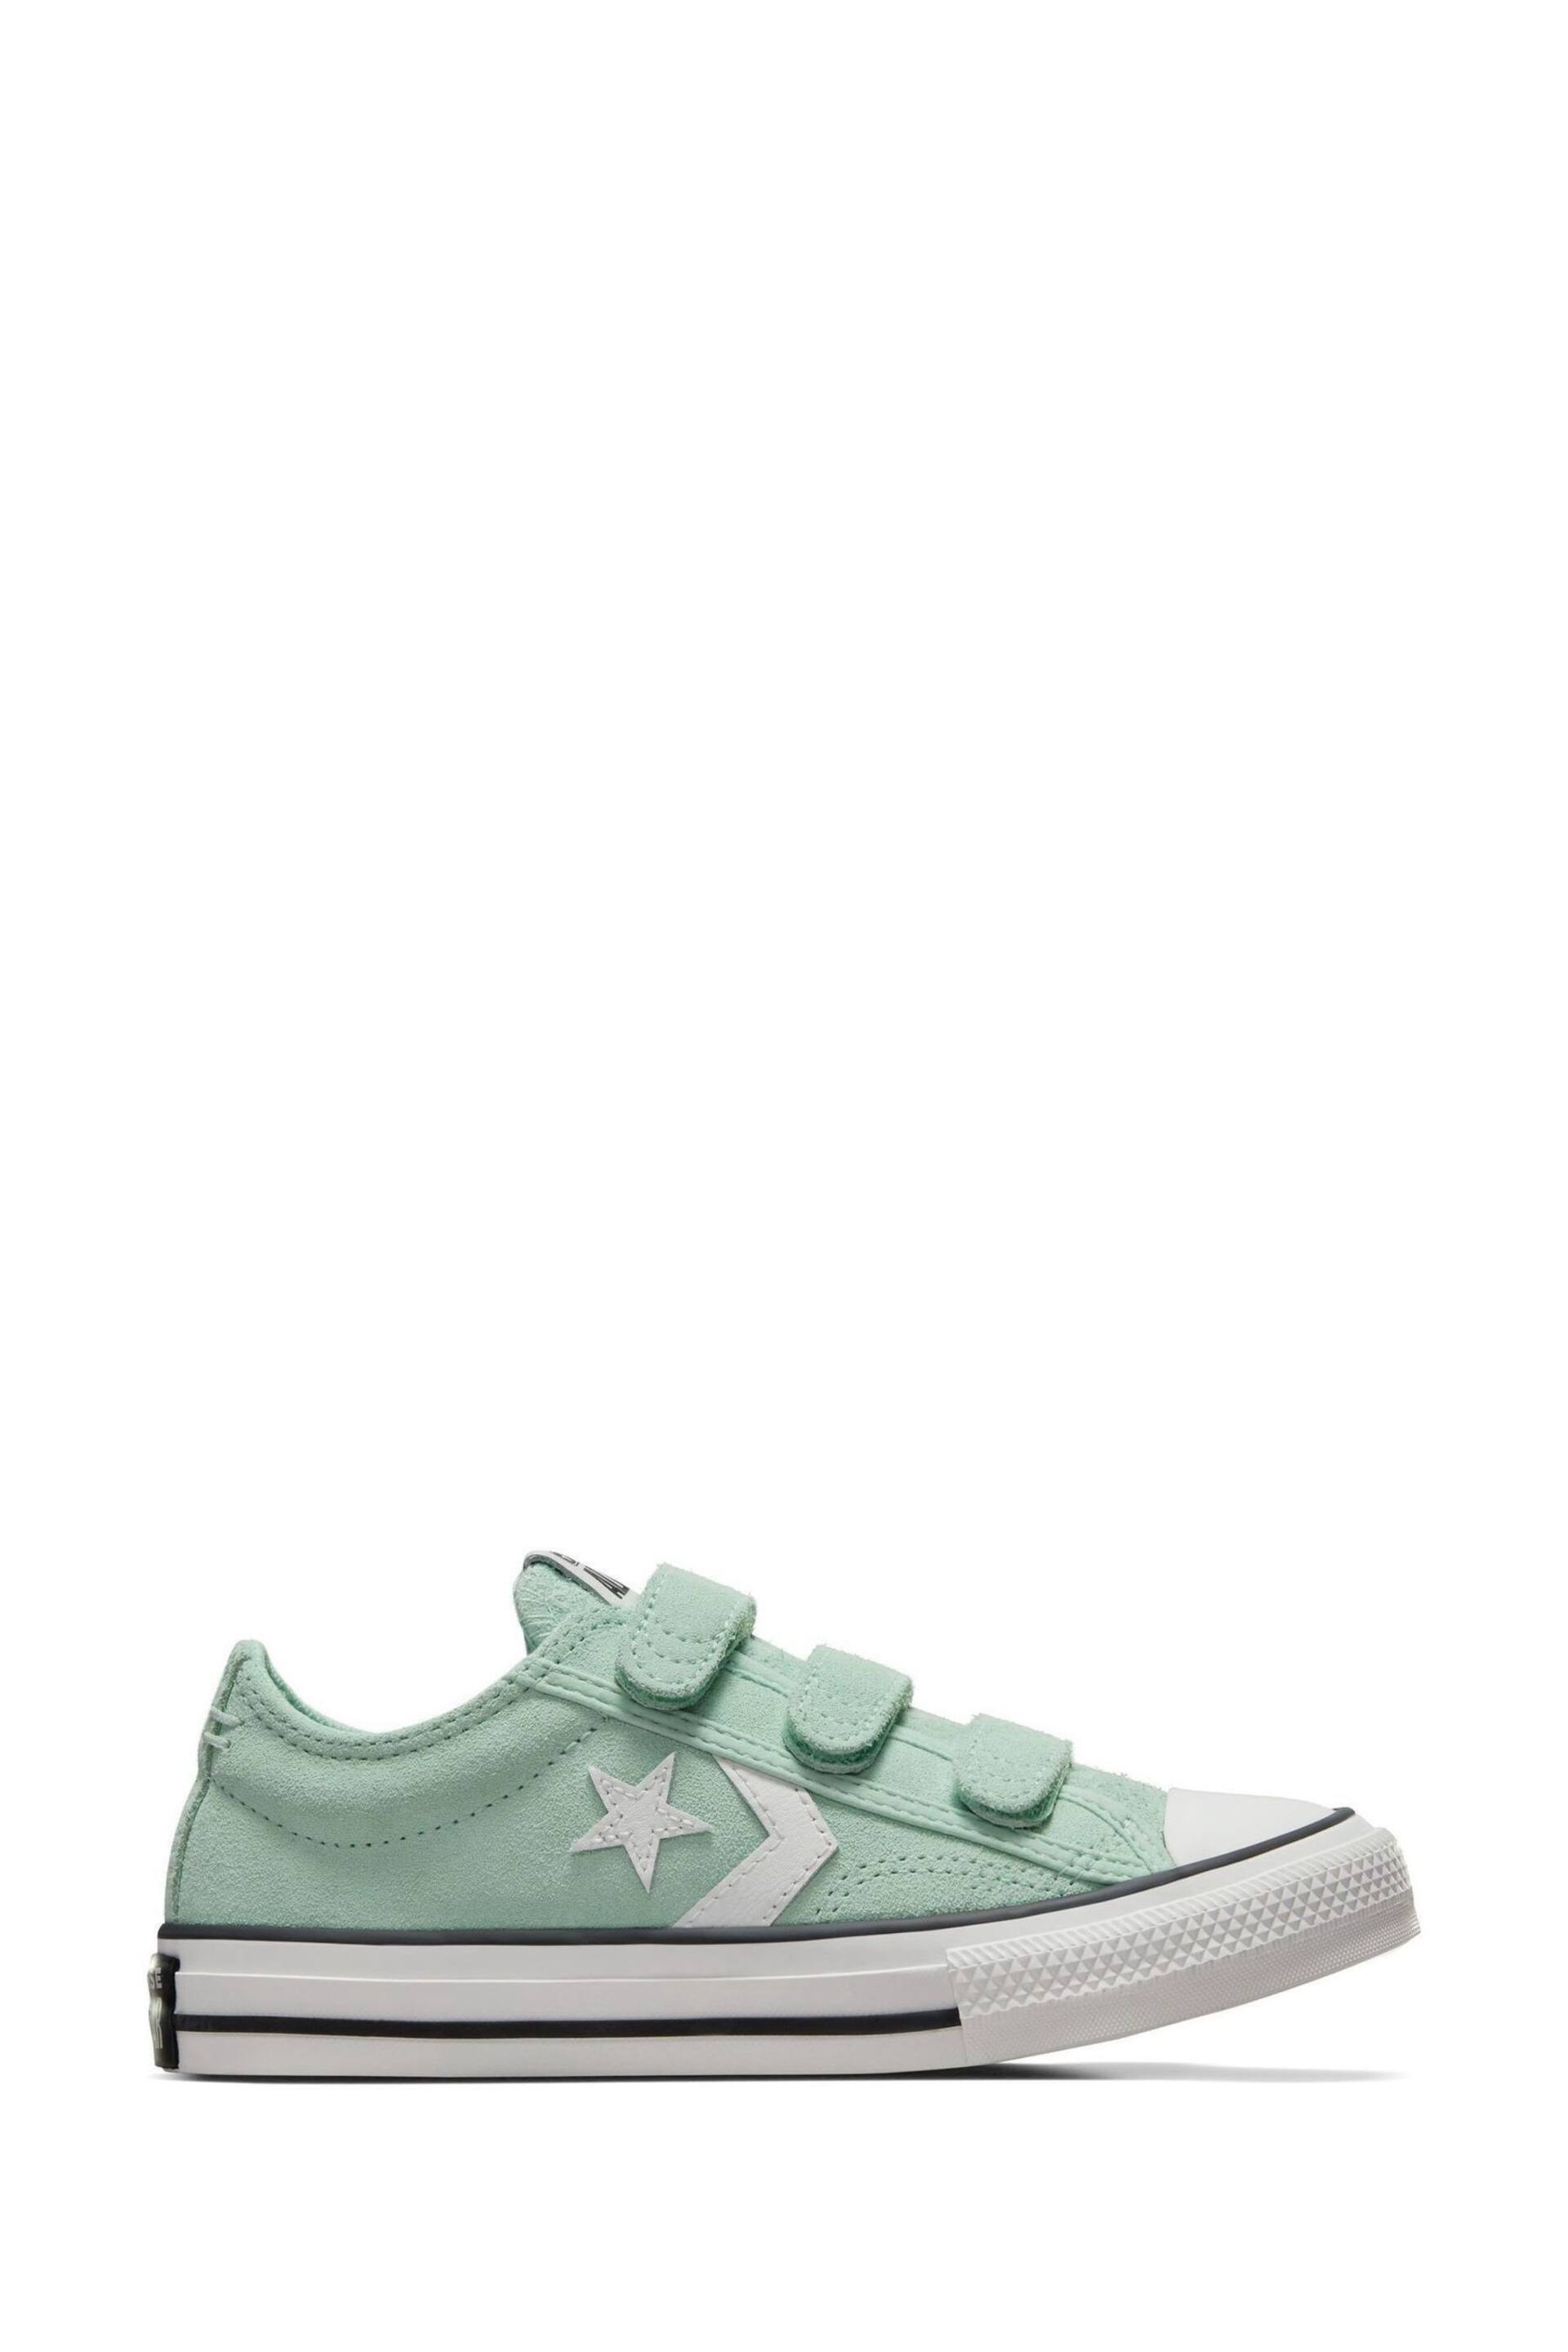 Converse Green Junior Star Player 76 3V Trainers - Image 1 of 9